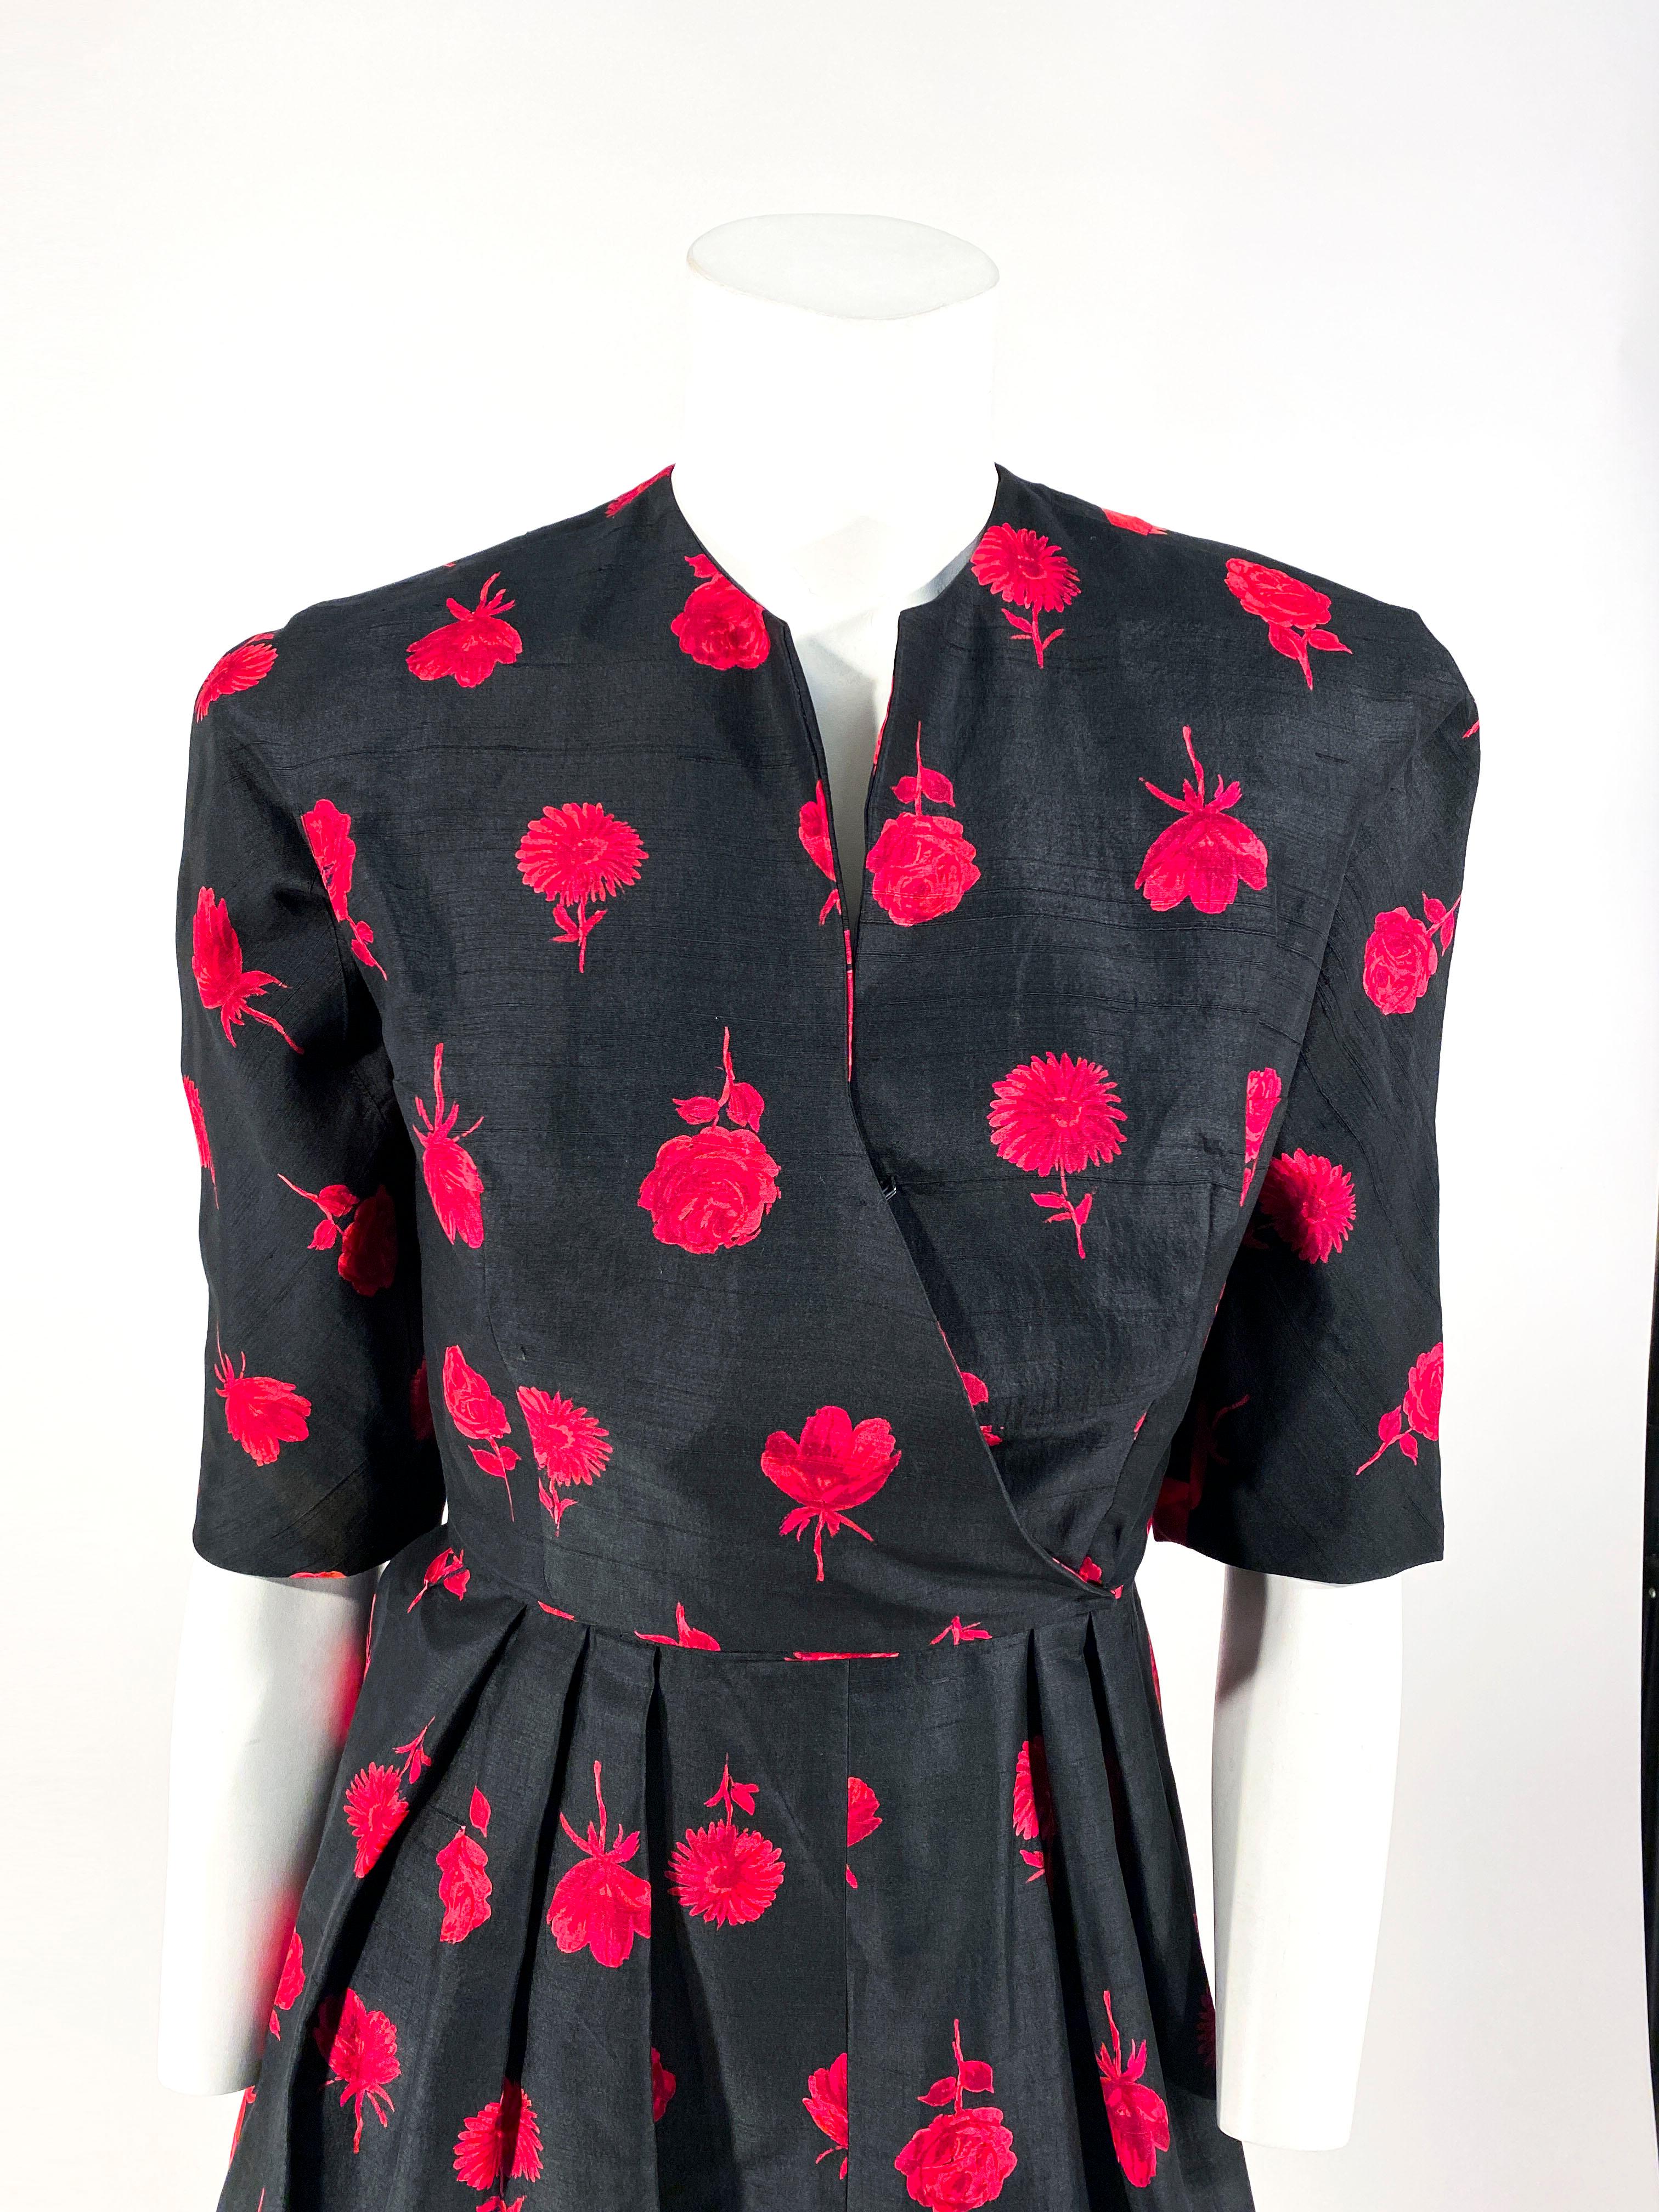 1950s I. Magnin black with red floral printed raw silk dress with a matching bolero jacket. The dress has structured shoulders, a sleeveless bodice, and a slight plunge v-neckline. The skirt is pleated at the waist creating a modestly full skirt.